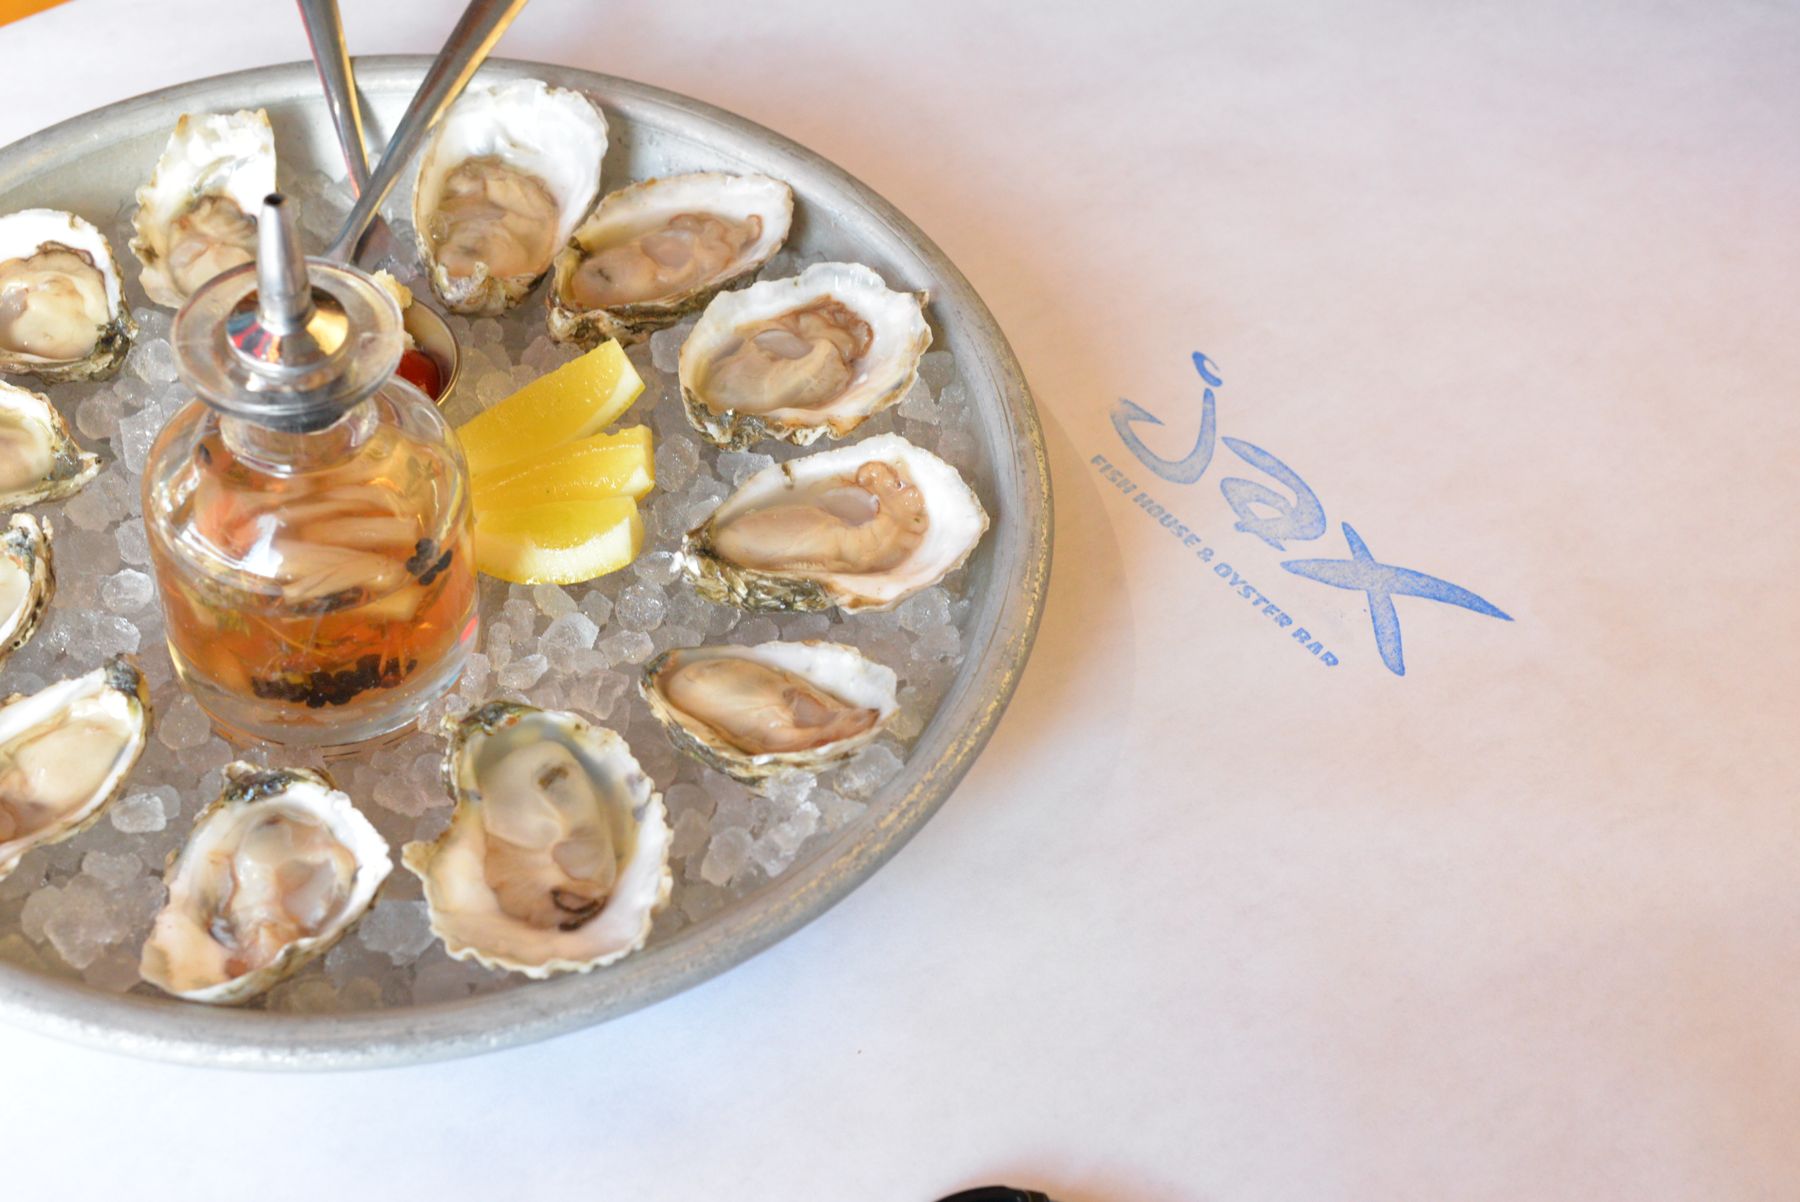 oyster platter from Jax Fish House & Oyster Bar